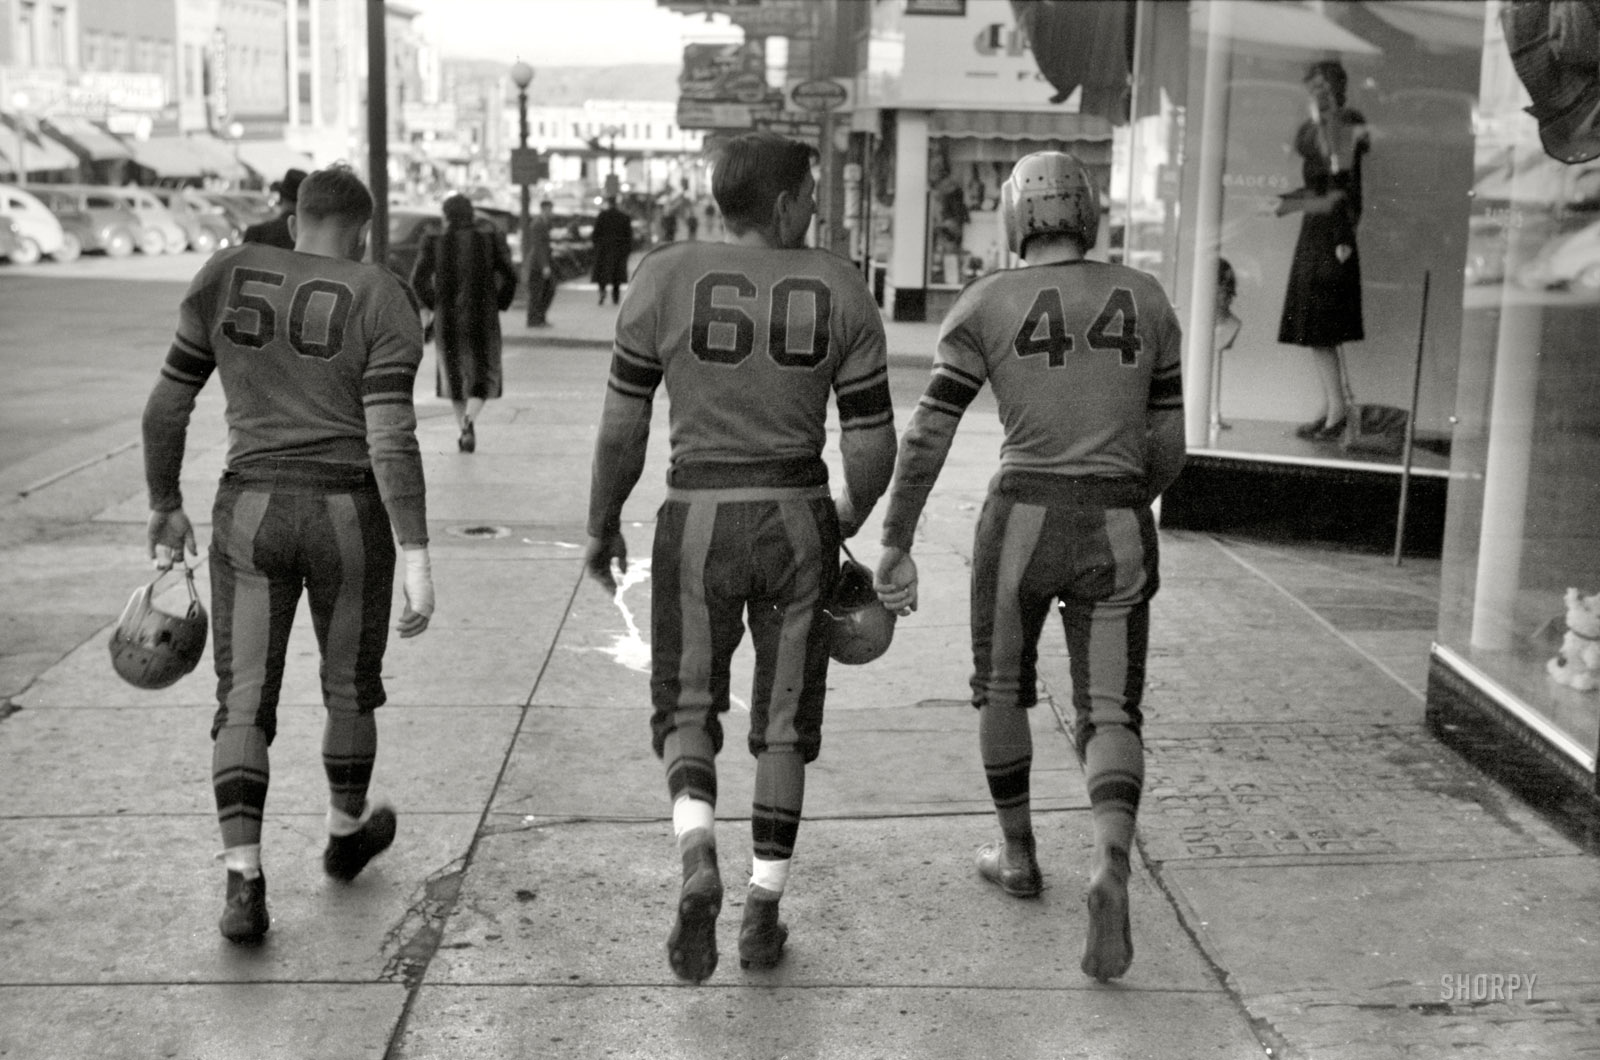 October 1940. "Football players. Minot, North Dakota." 35mm nitrate negative by John Vachon for the Farm Security Administration. View full size.